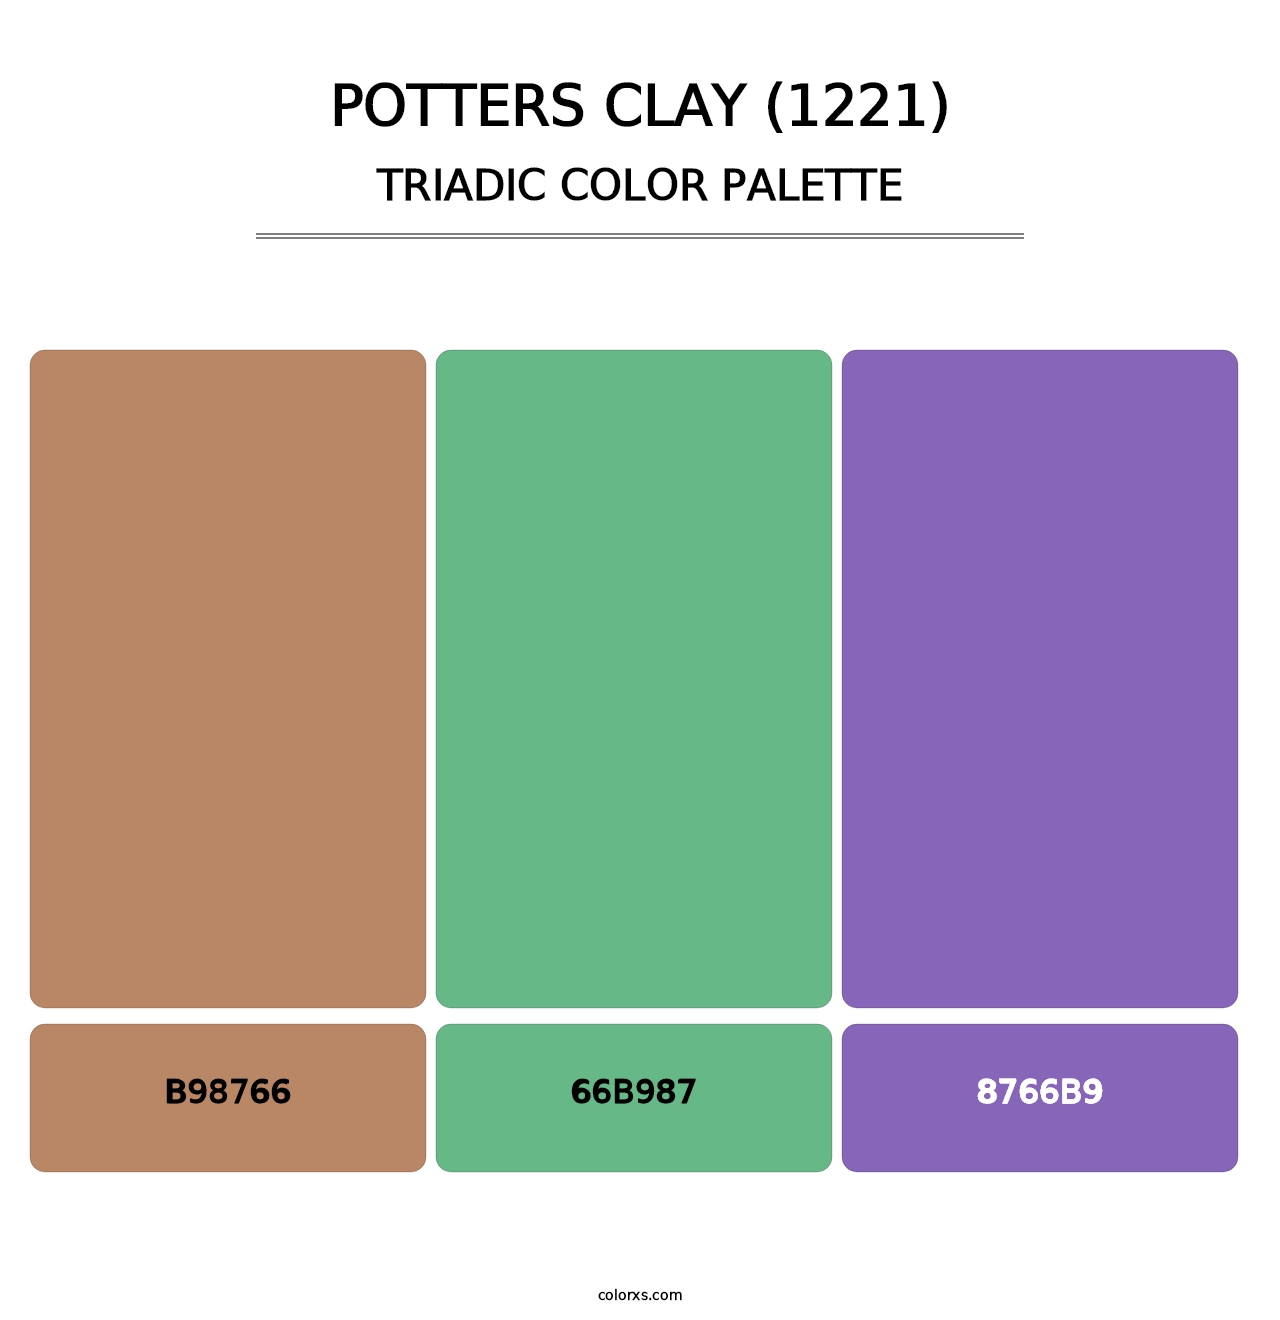 Potters Clay (1221) - Triadic Color Palette